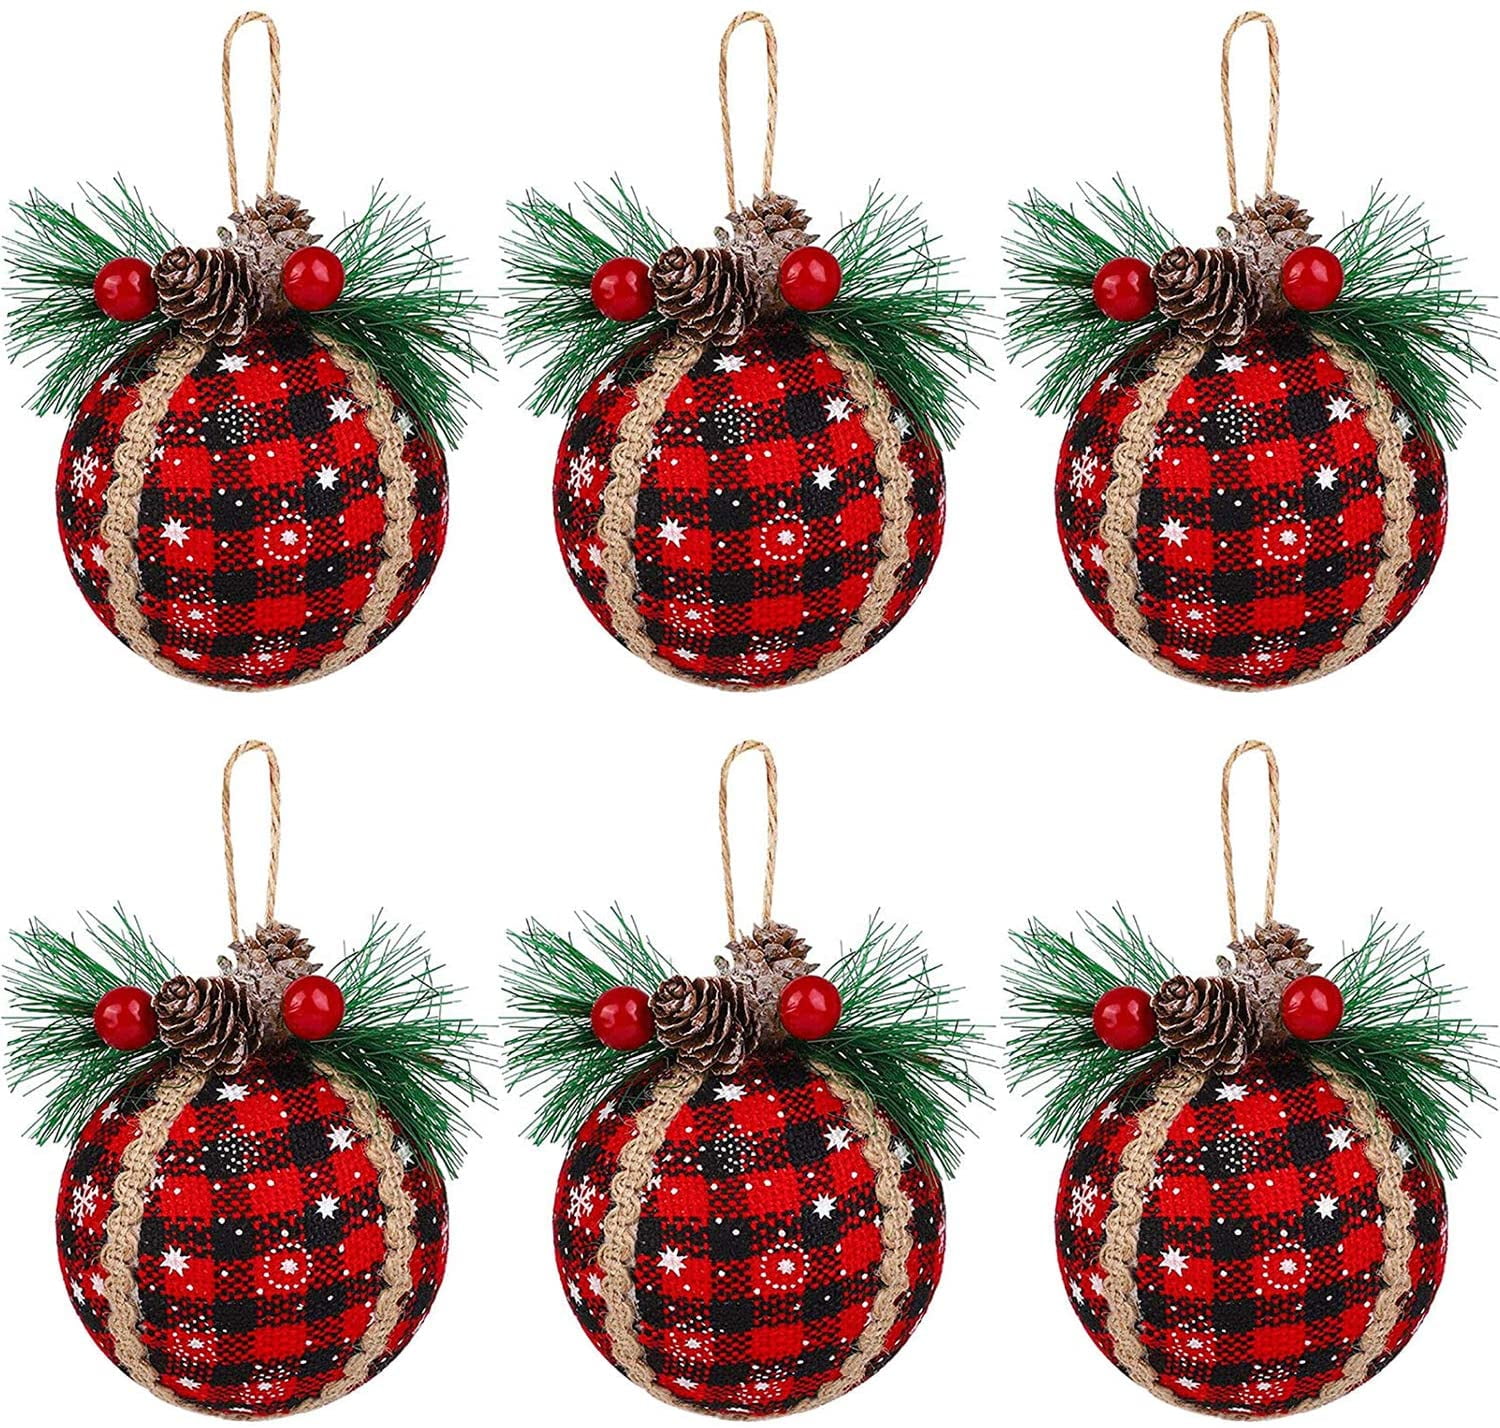 Christmas Decorations Tree Ornaments Set 6PCS Assorted White Red Rustic Hanging Ball Ornaments New Years Decorations with Pine Cones Needles Xmas Decor